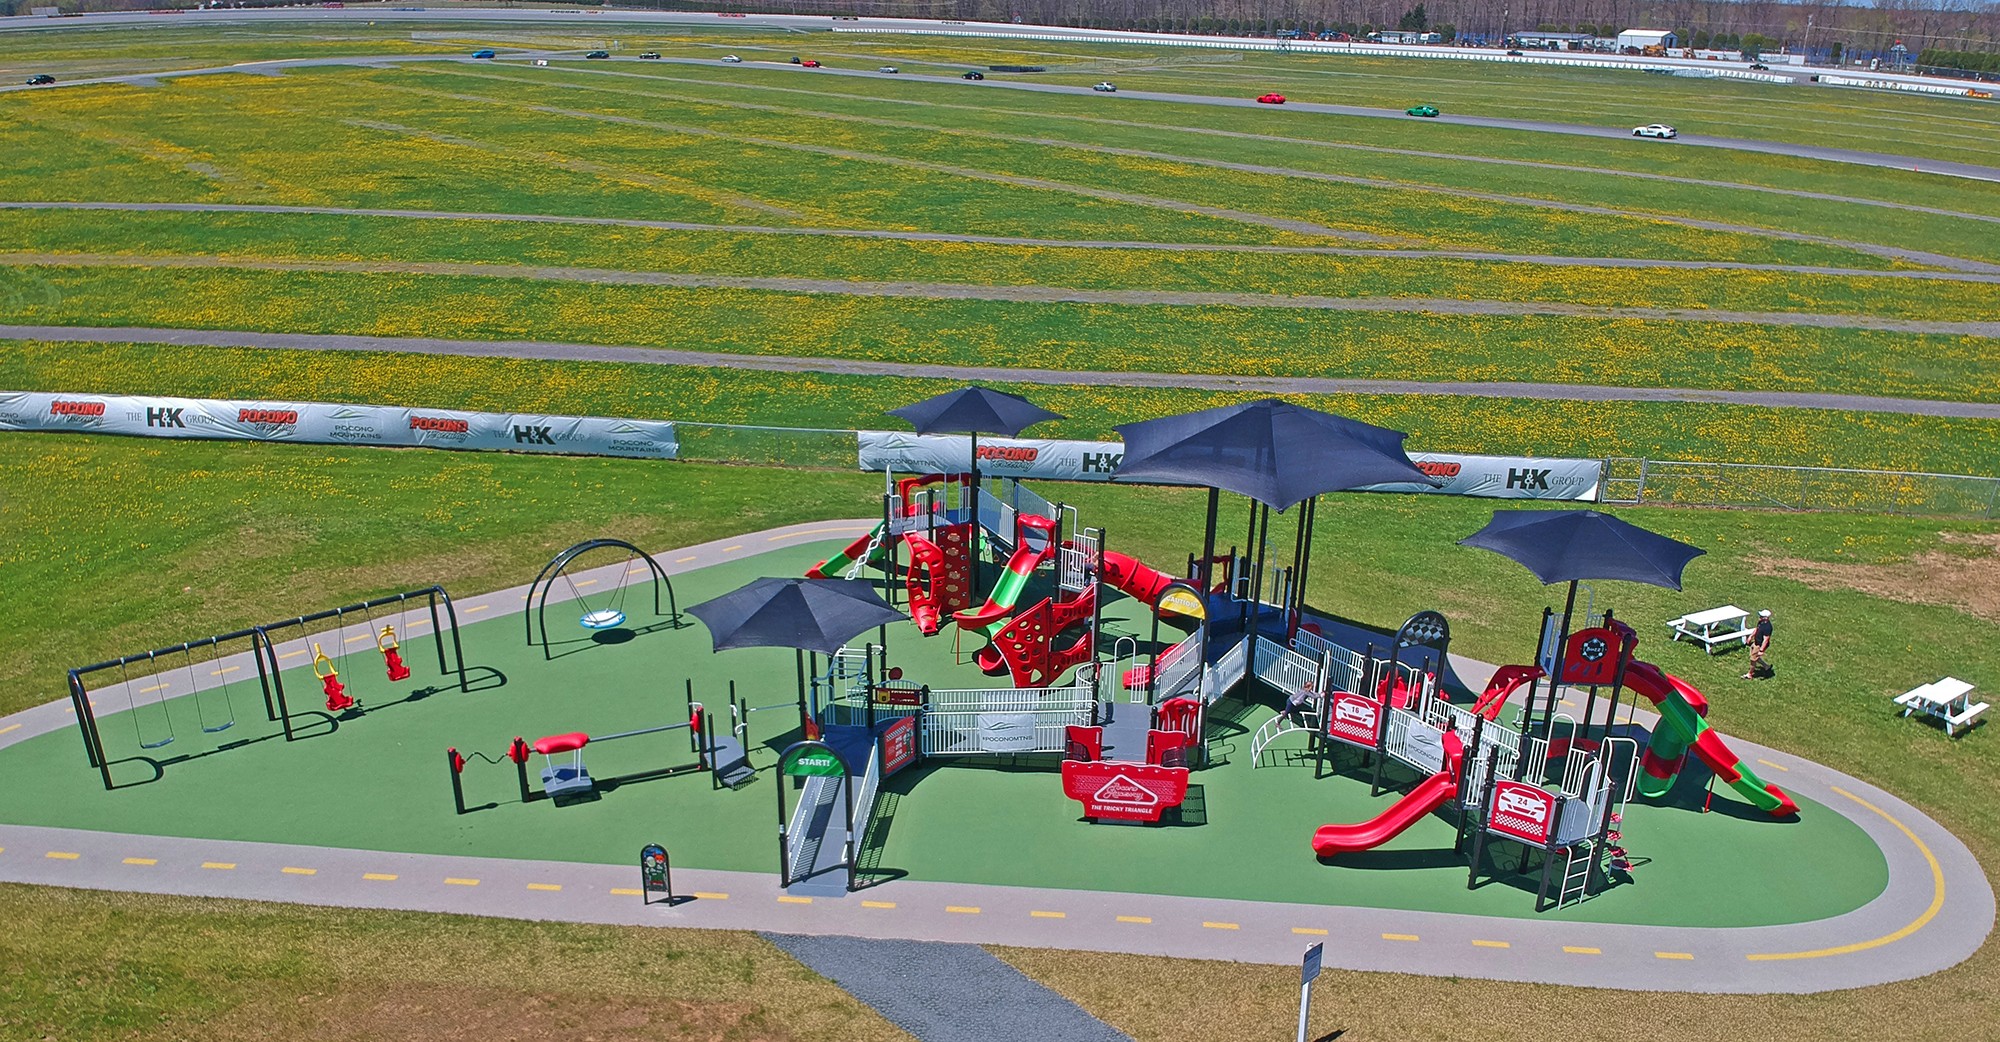 Featured image of red themed Pocono Raceway Playground on green turf